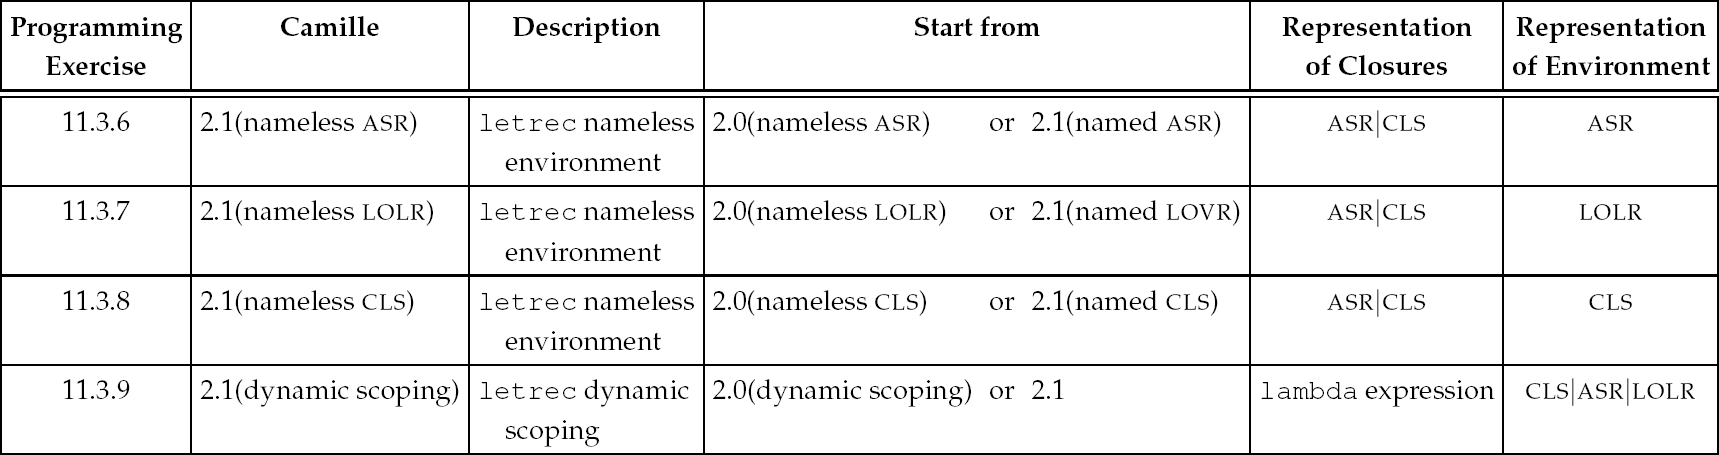 A table of description and representation of Camille in different programming exercises.